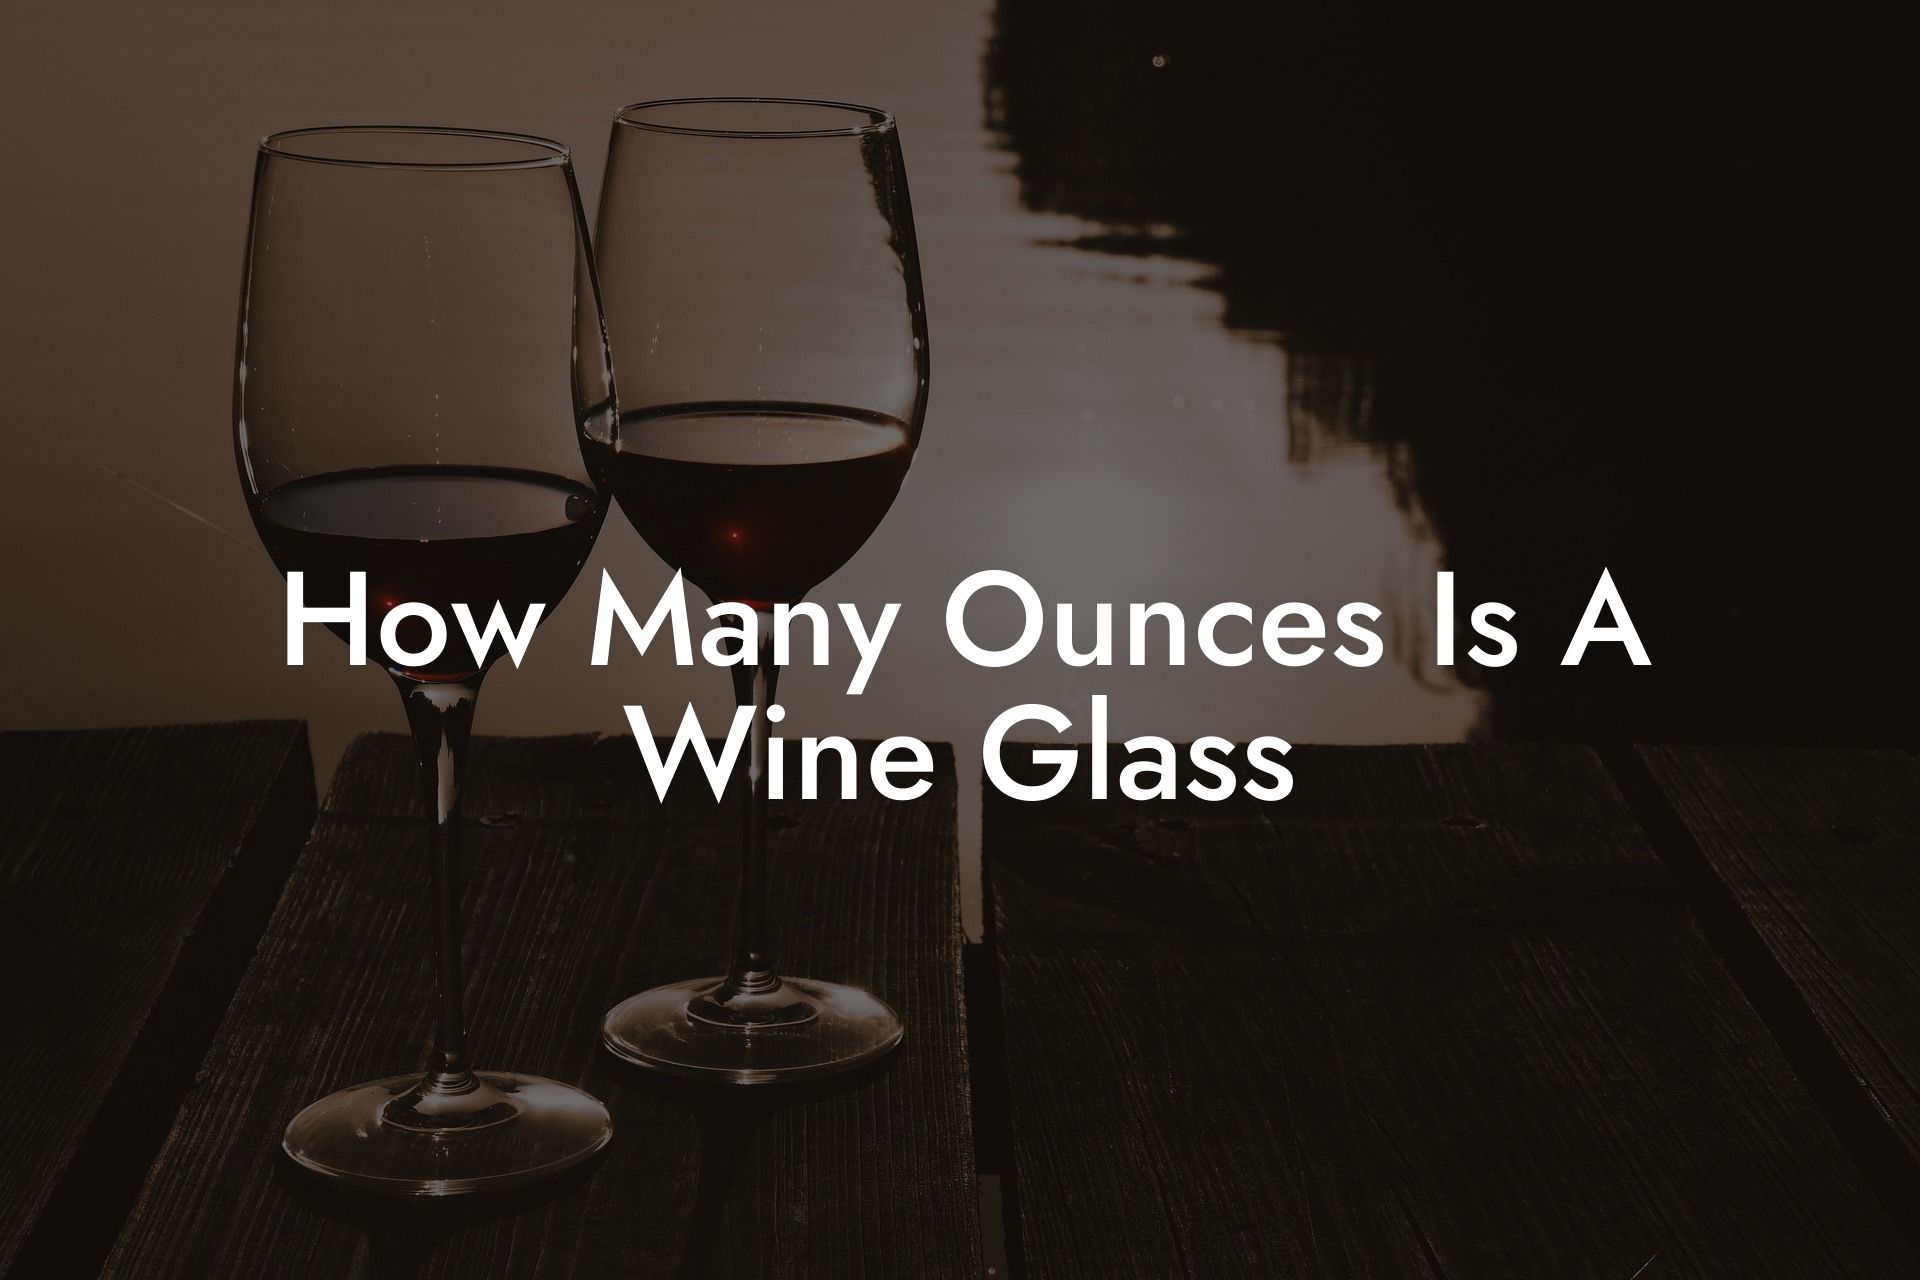 How Many Ounces Is A Wine Glass